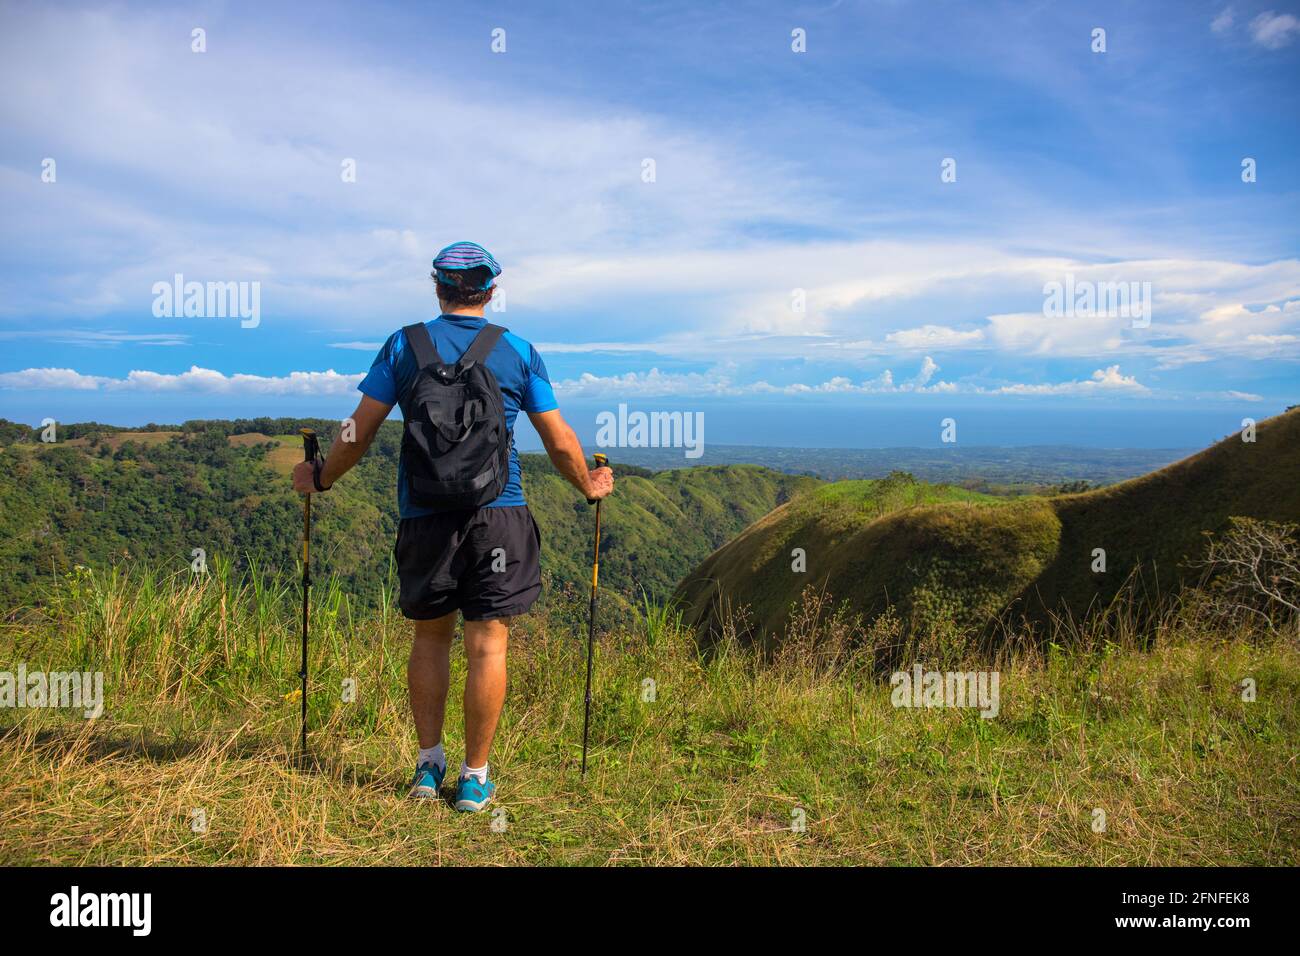 Trekker with backpack on the top of hill on natural mountain landscape. Tourist travels through the mountains. Photos of holidays in beautiful places. Stock Photo